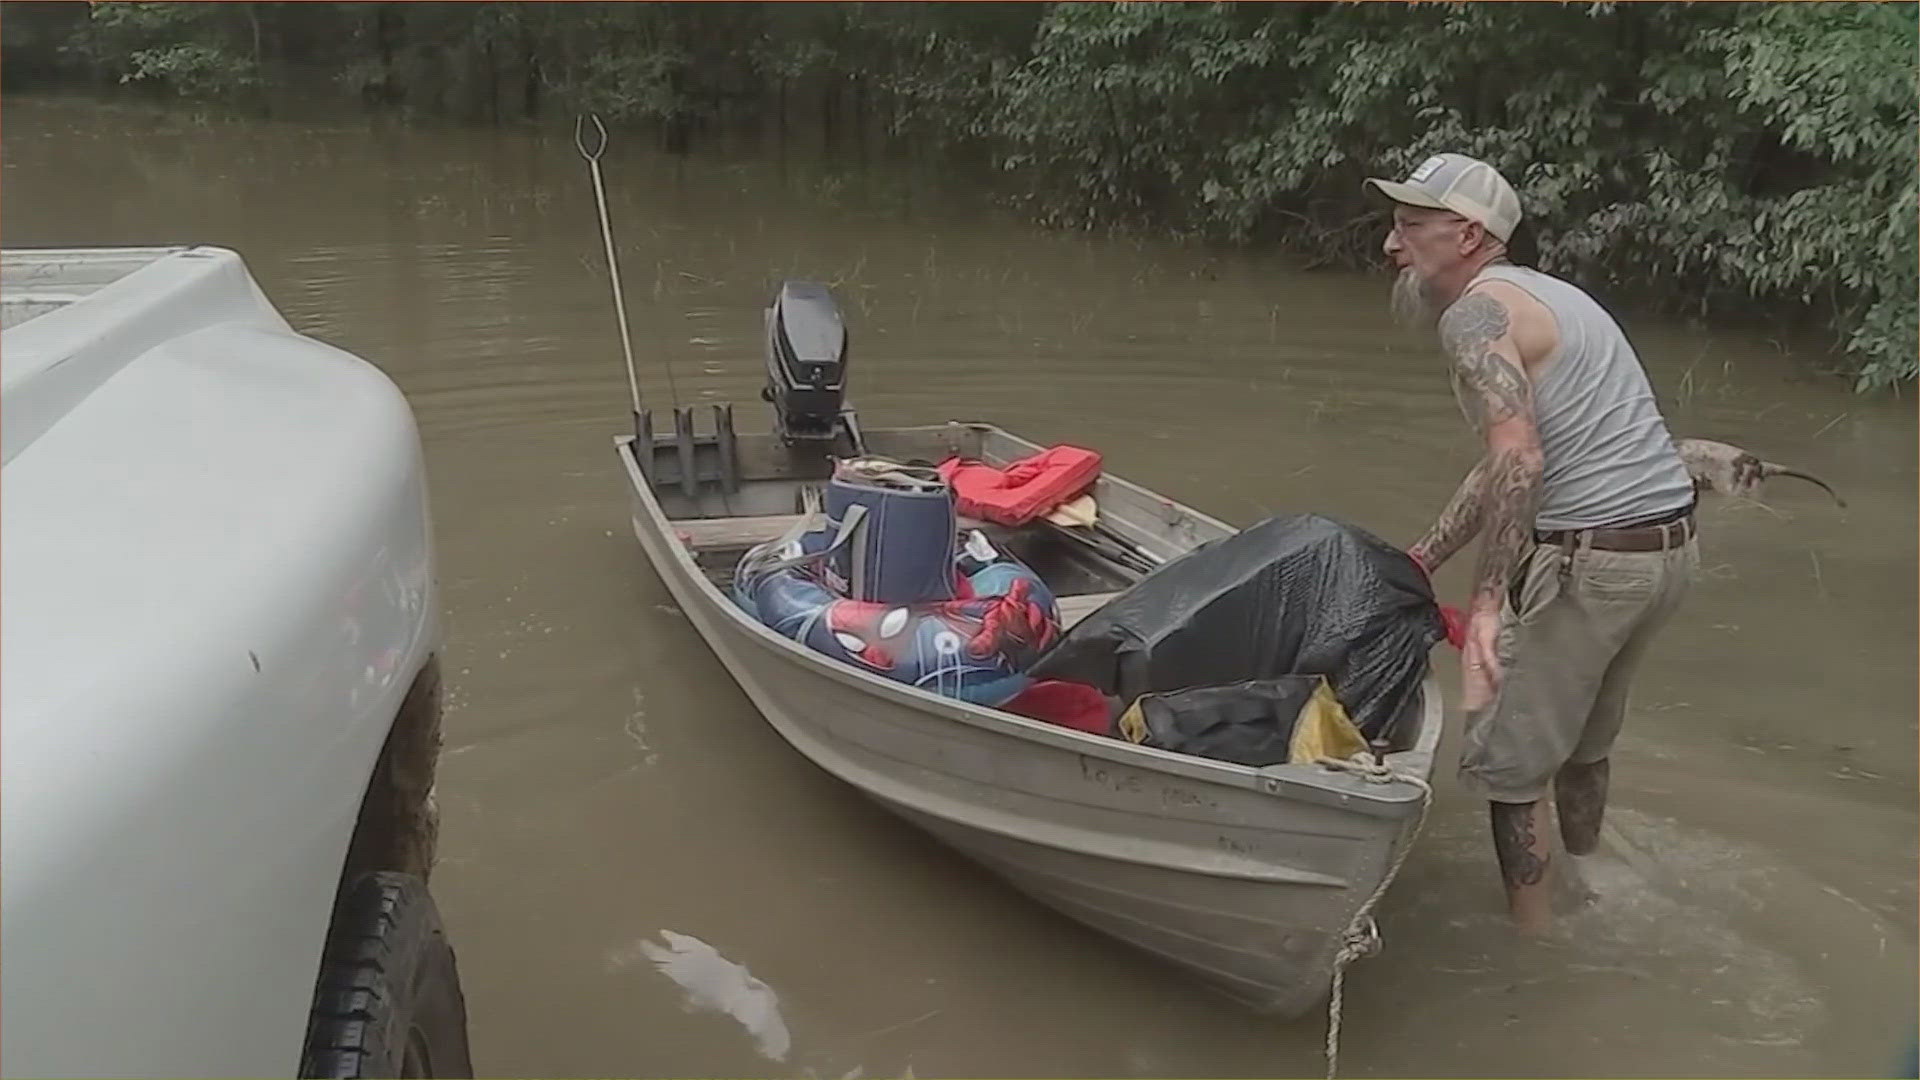 The Trinity River flooded last week, with some residents leaving their homes as a result.